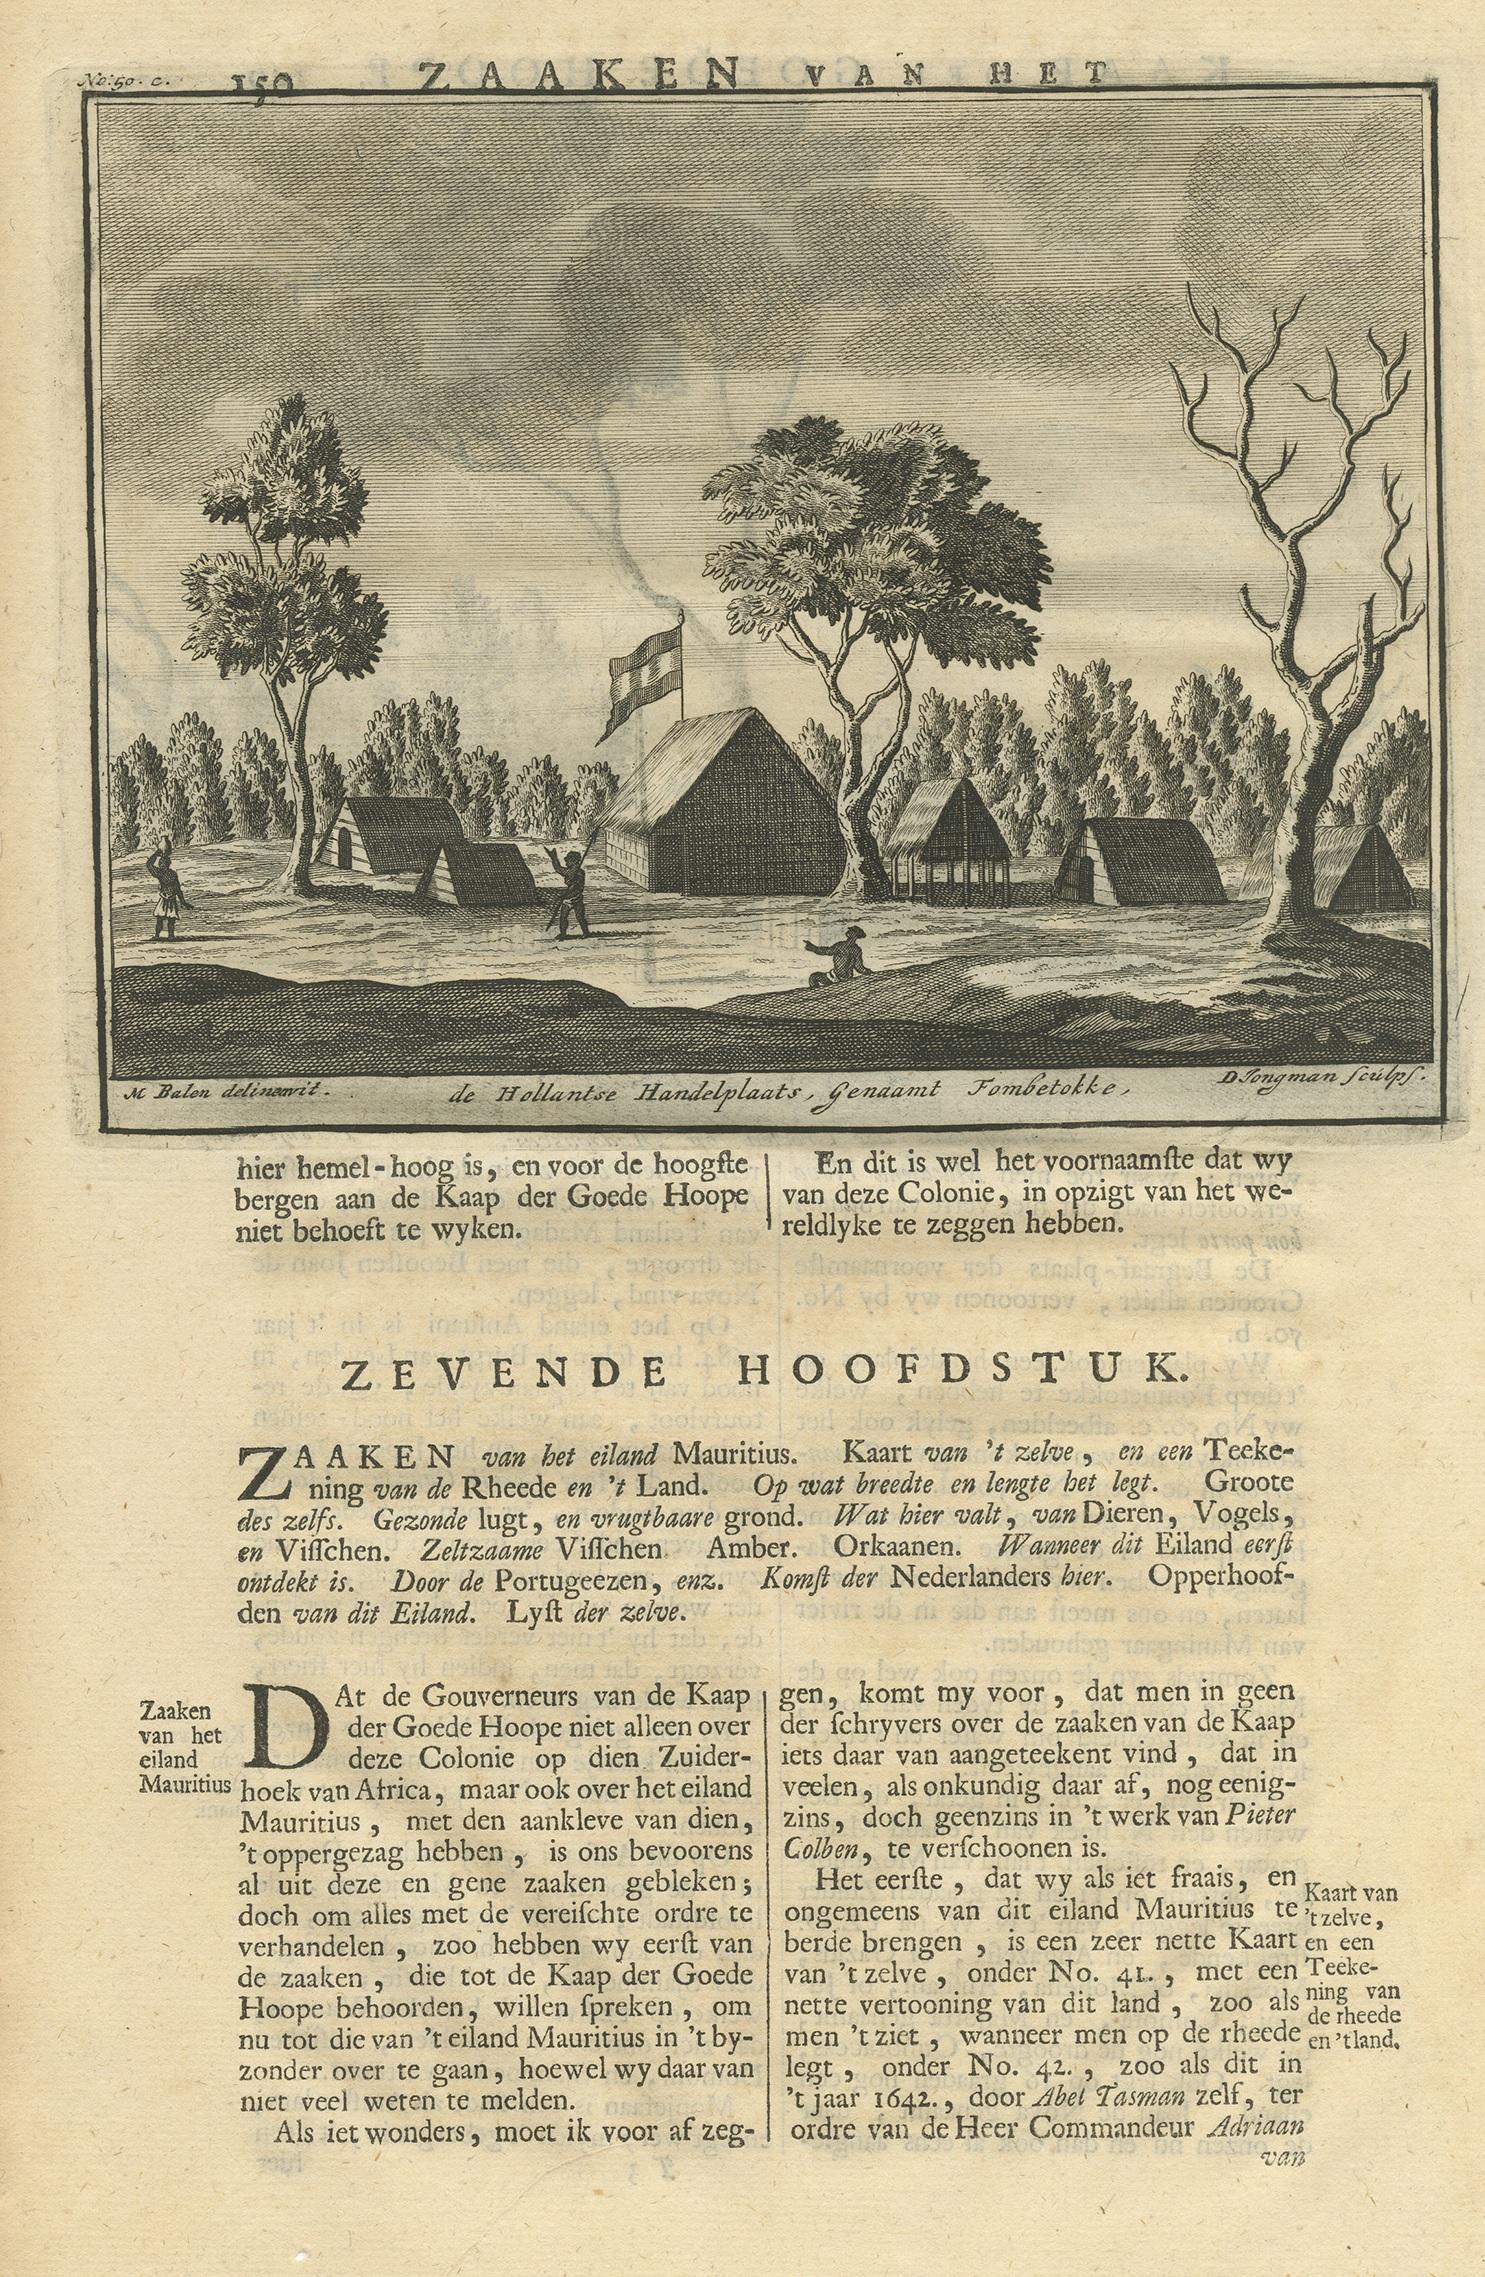 Two images depicting Madagascar, Africa. The first image shows a Dutch trading post called 'Fombetokke'. The second image, on verso, depicts a cemetery. This print originates from 'Oud en Nieuw Oost-Indiën' by F. Valentijn.